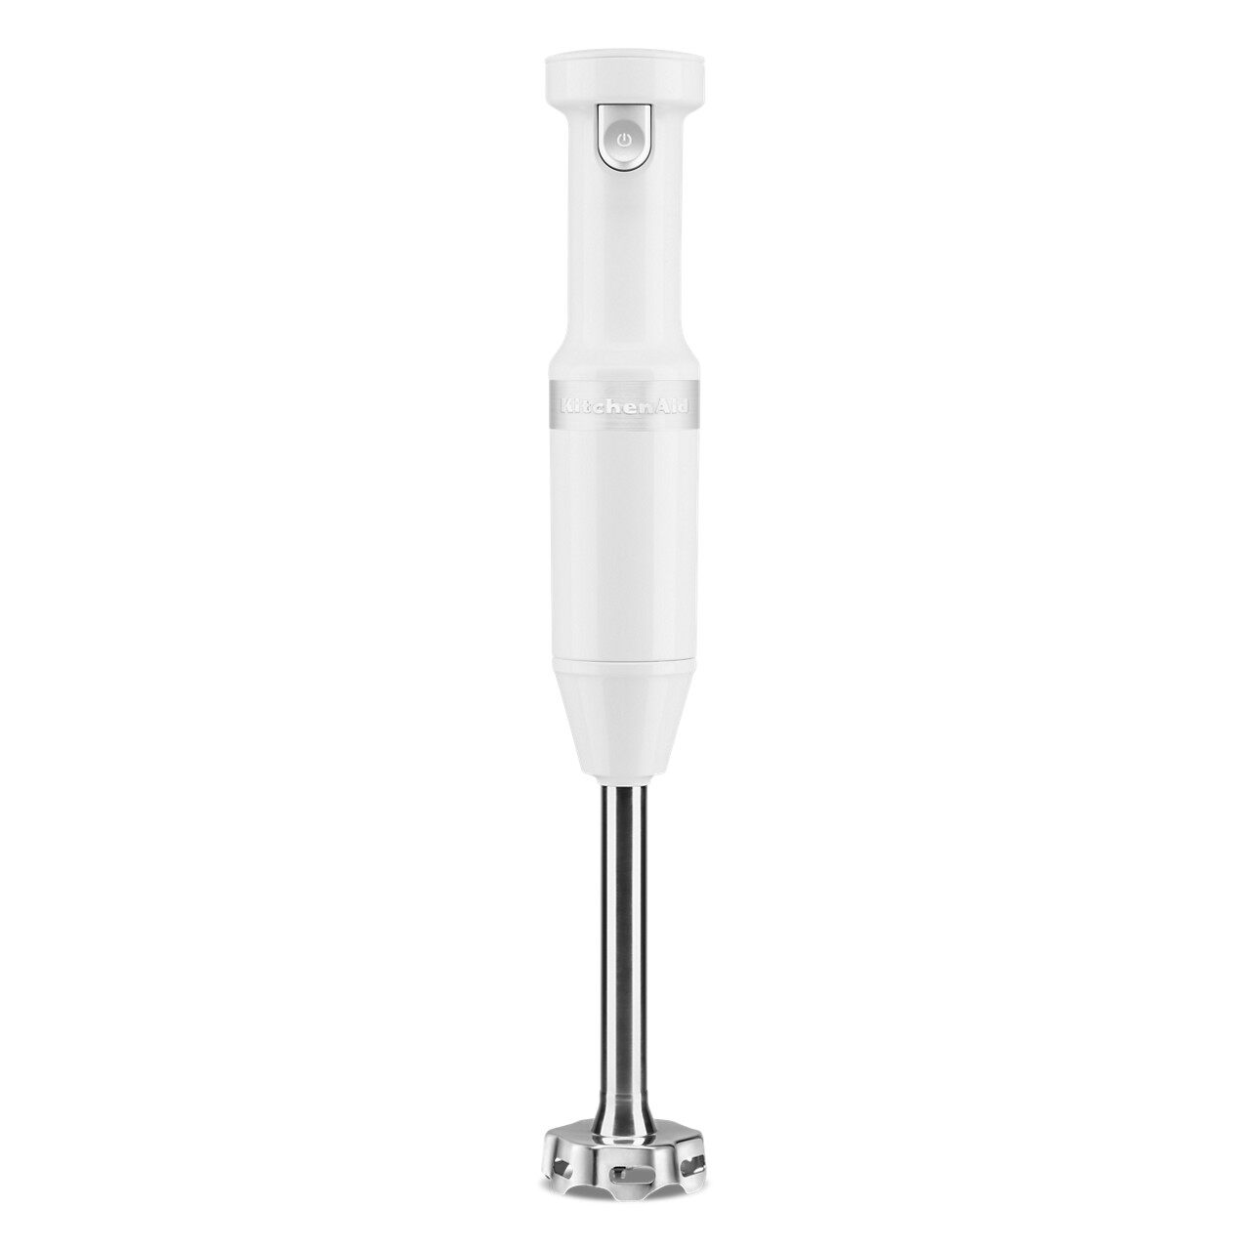 cordless immersion blender, variable speed empire red